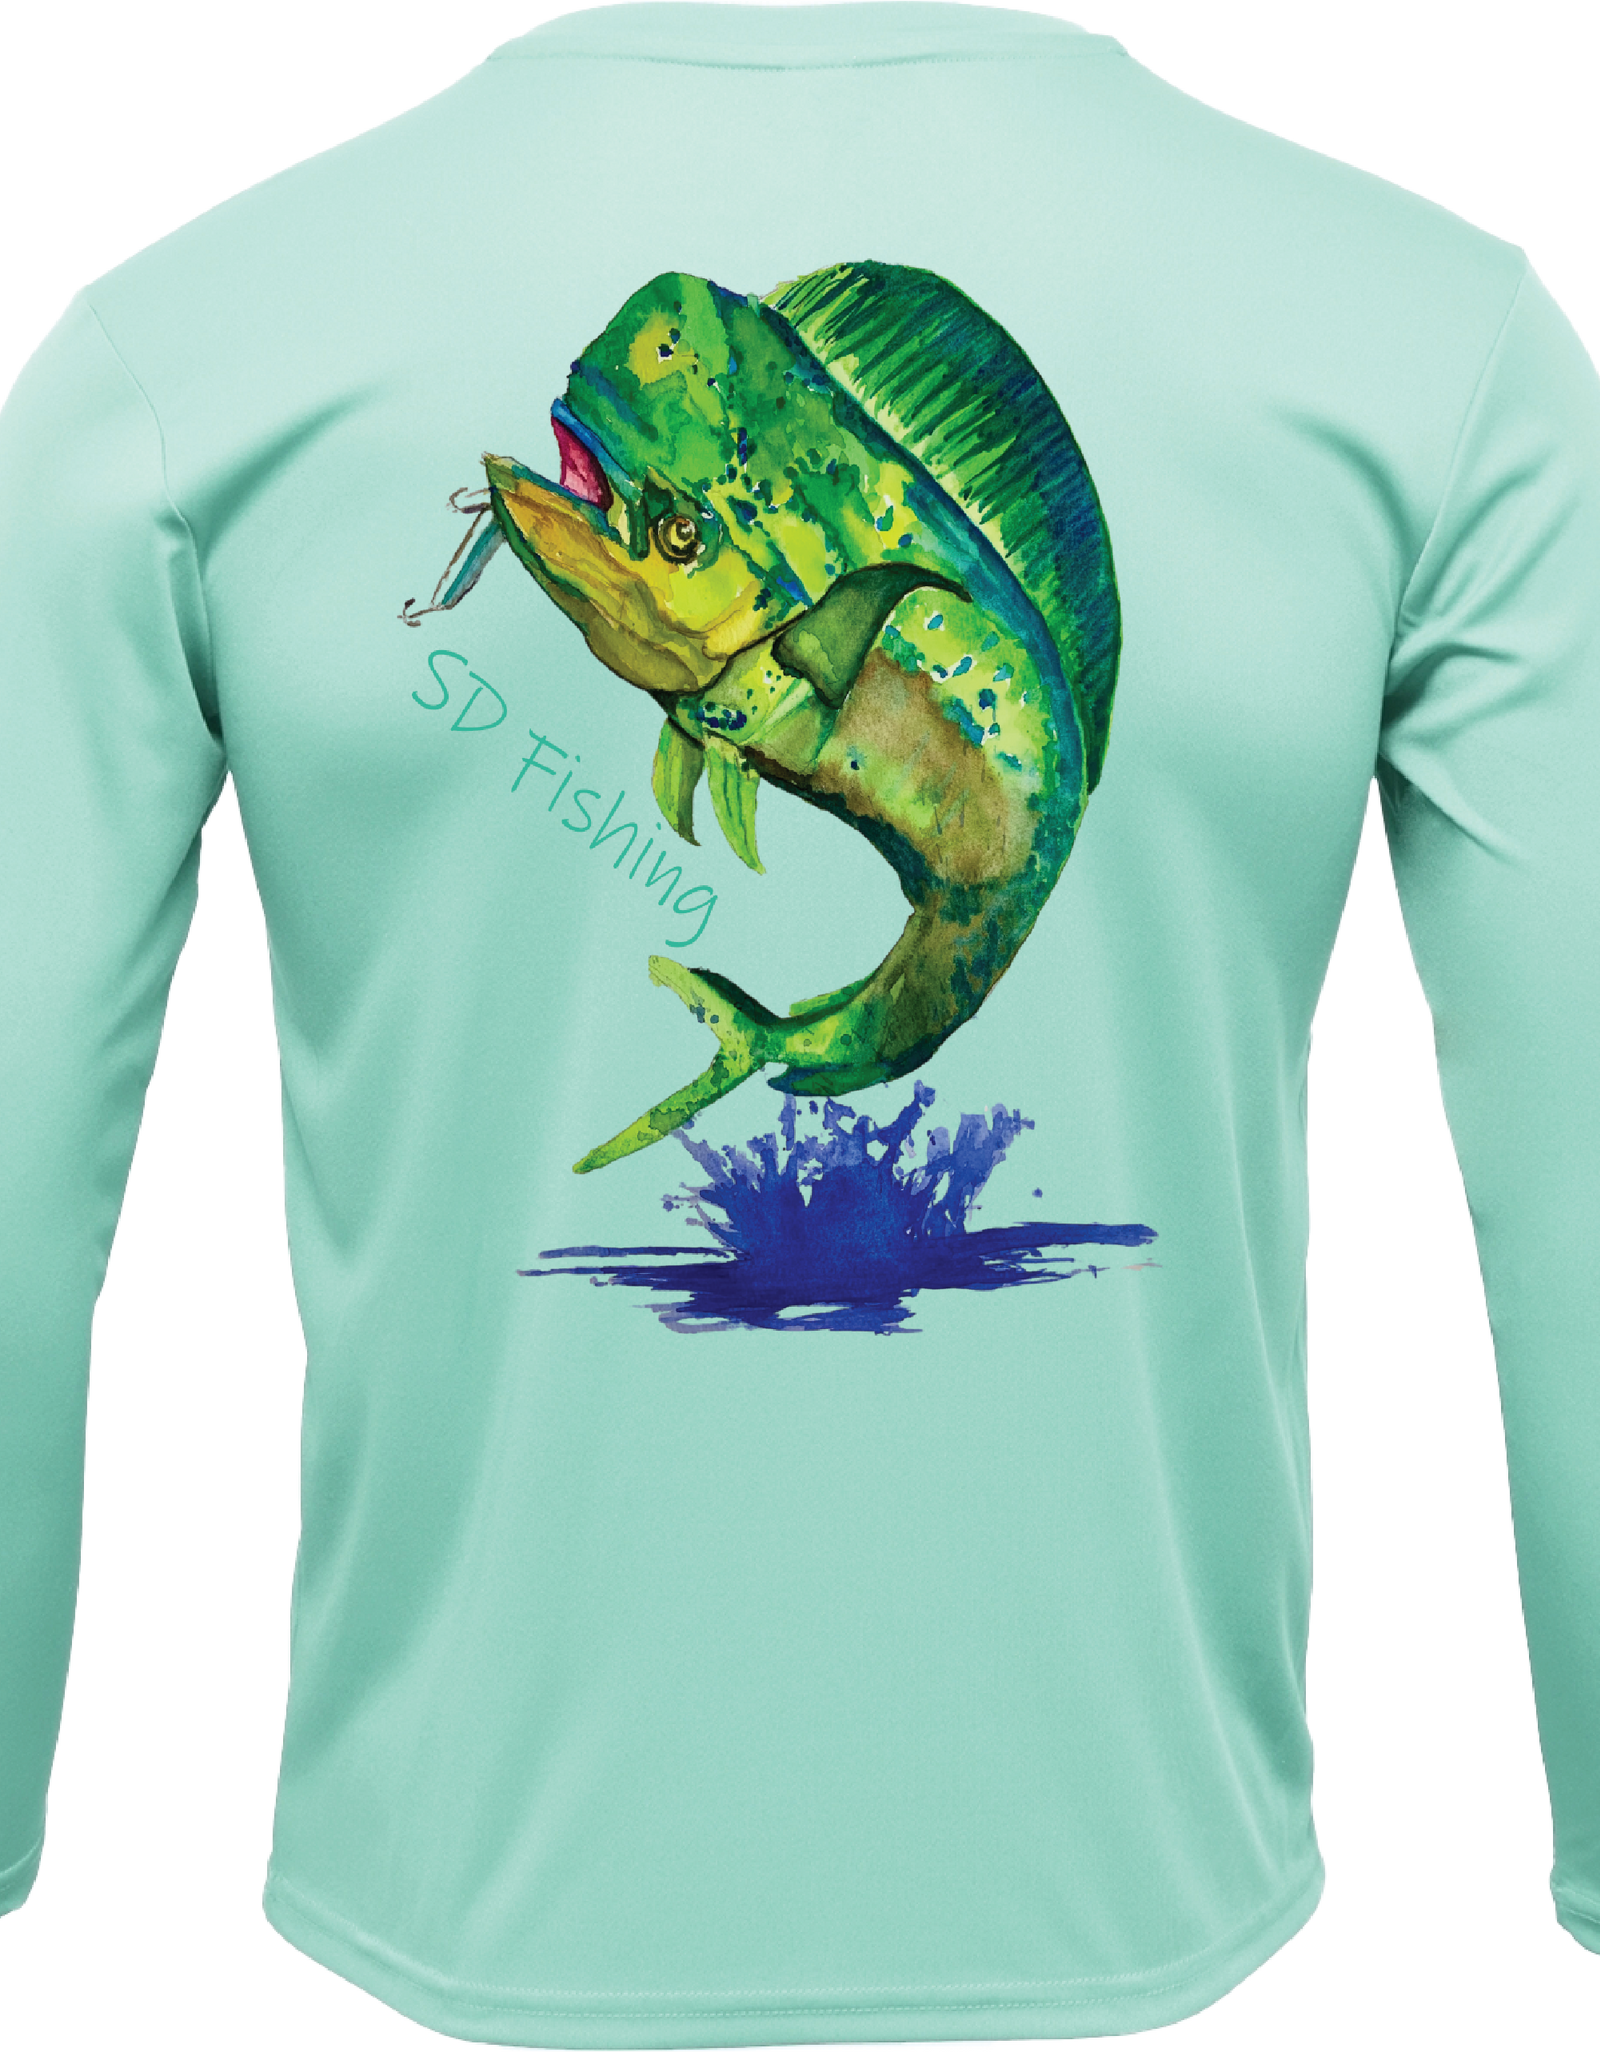 SouthBound LS Dry Fit Teal Fish Shirt